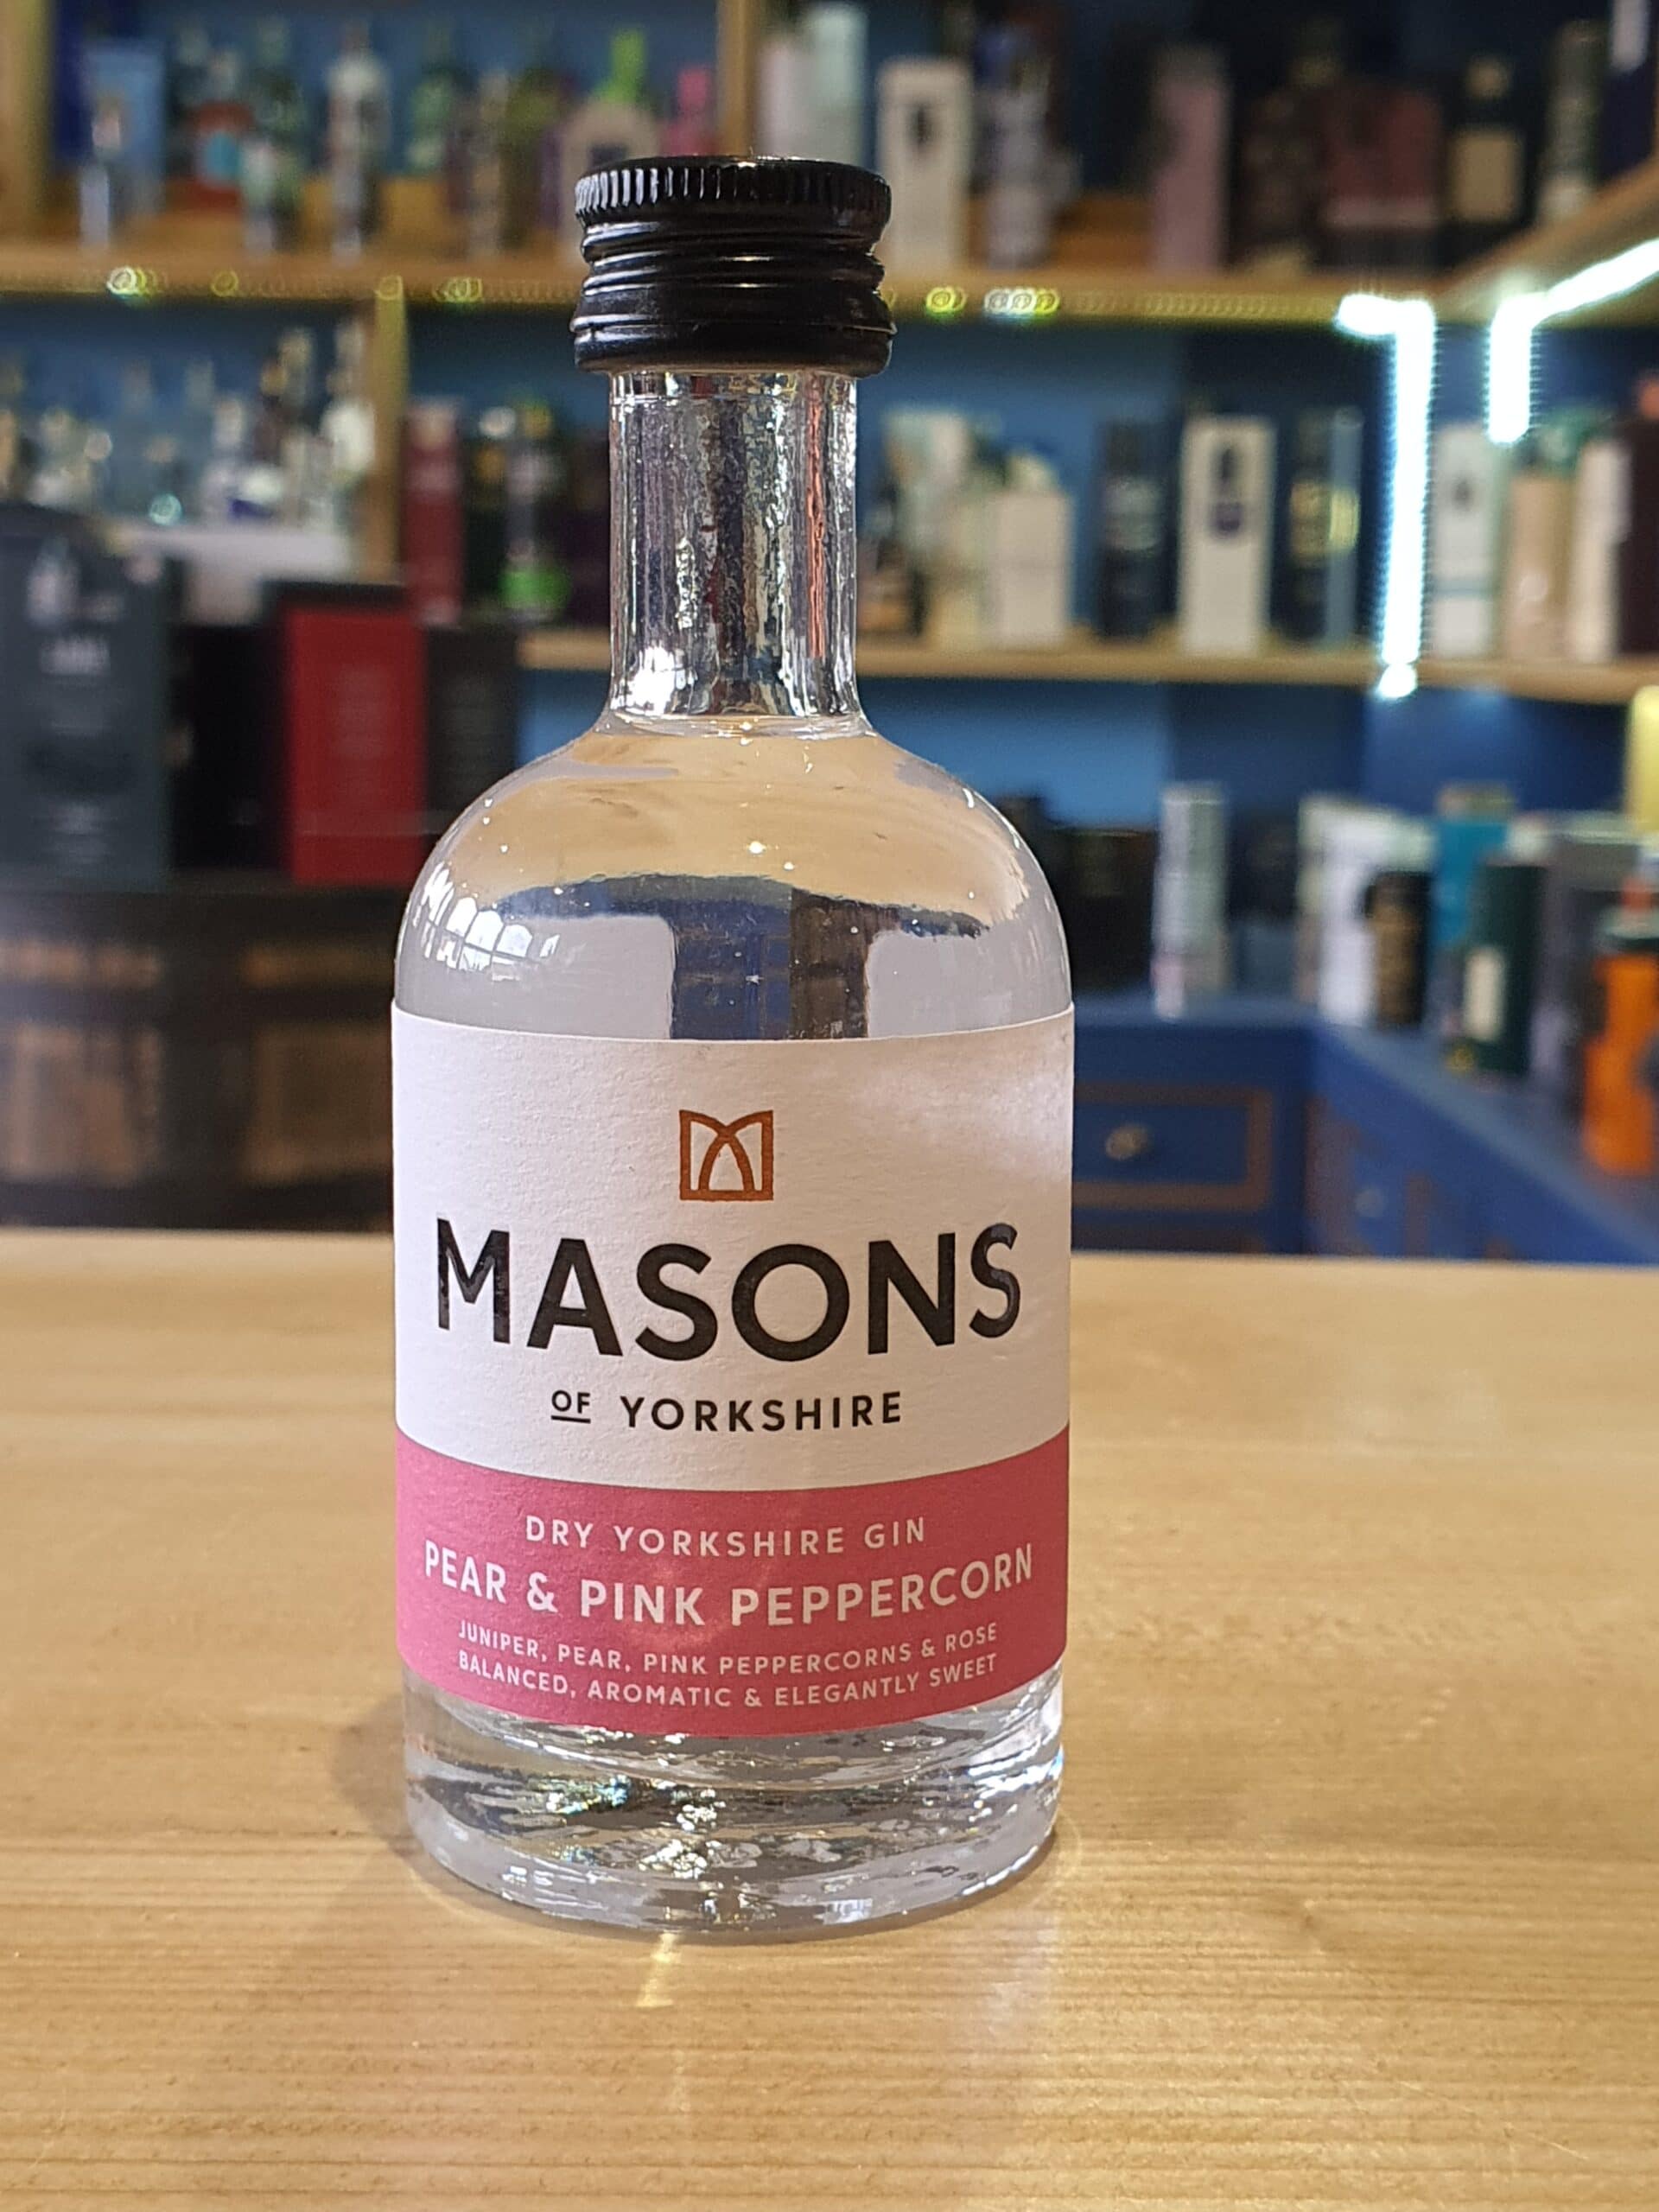 Masons Pear & Pink Peppercorn Dry Yorkshire Gin 5cl 42%